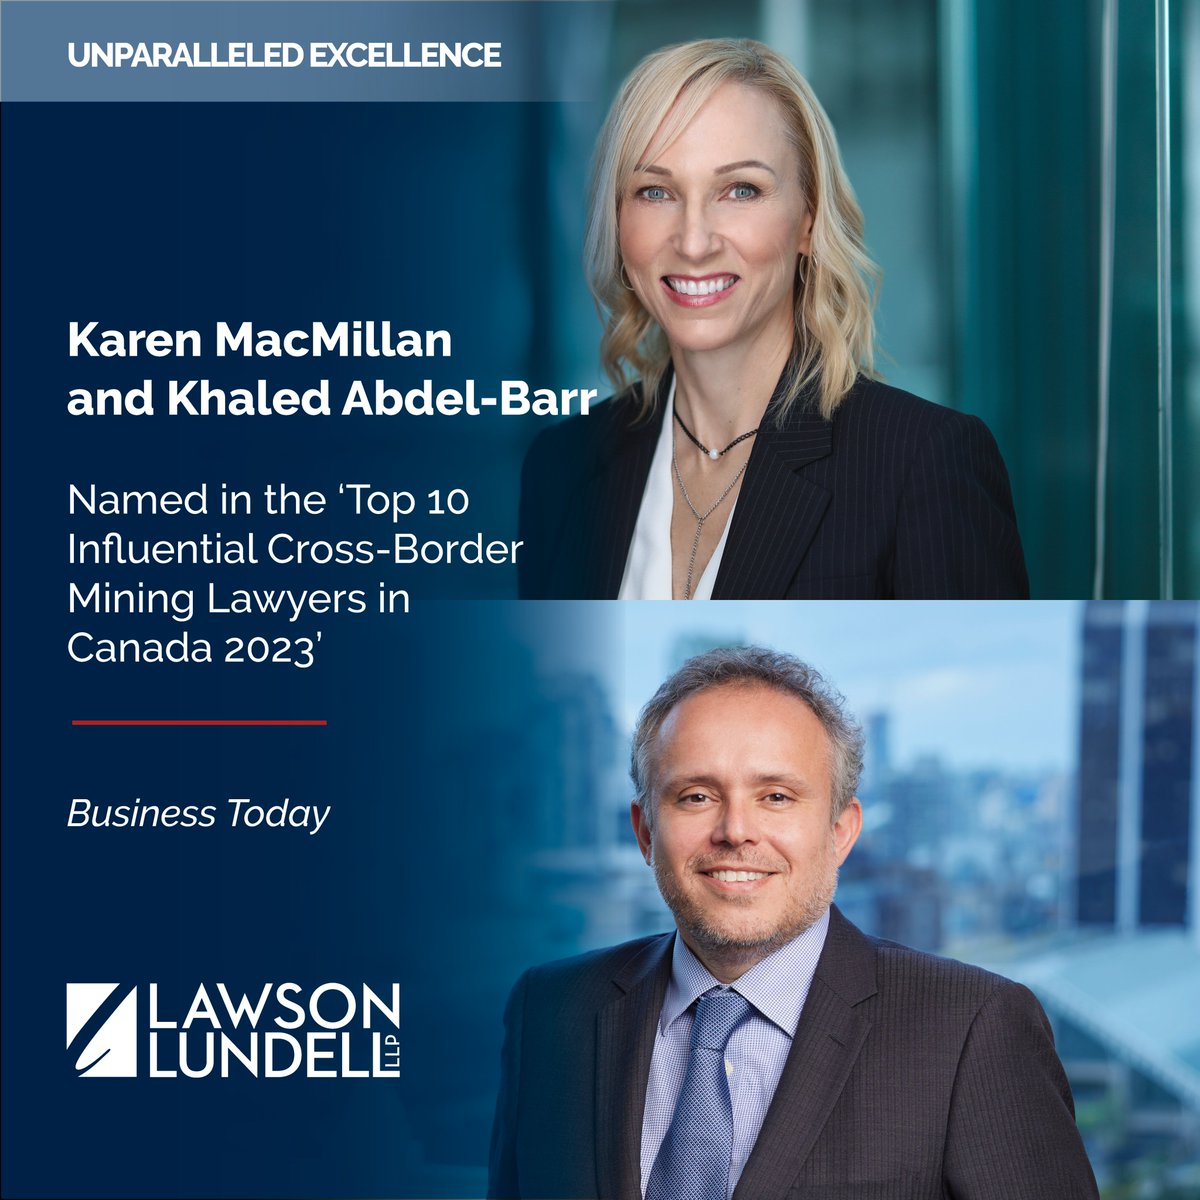 We are pleased to announce that Lawson Lundell lawyers Karen MacMillan and Khaled Abdel-Barr have been named in Business Today's list of the 'Top 10 Influential Cross-Border Mining Lawyers in Canada 2023.' Click here to learn more: lawsonlundell.com/newsroom-news-…